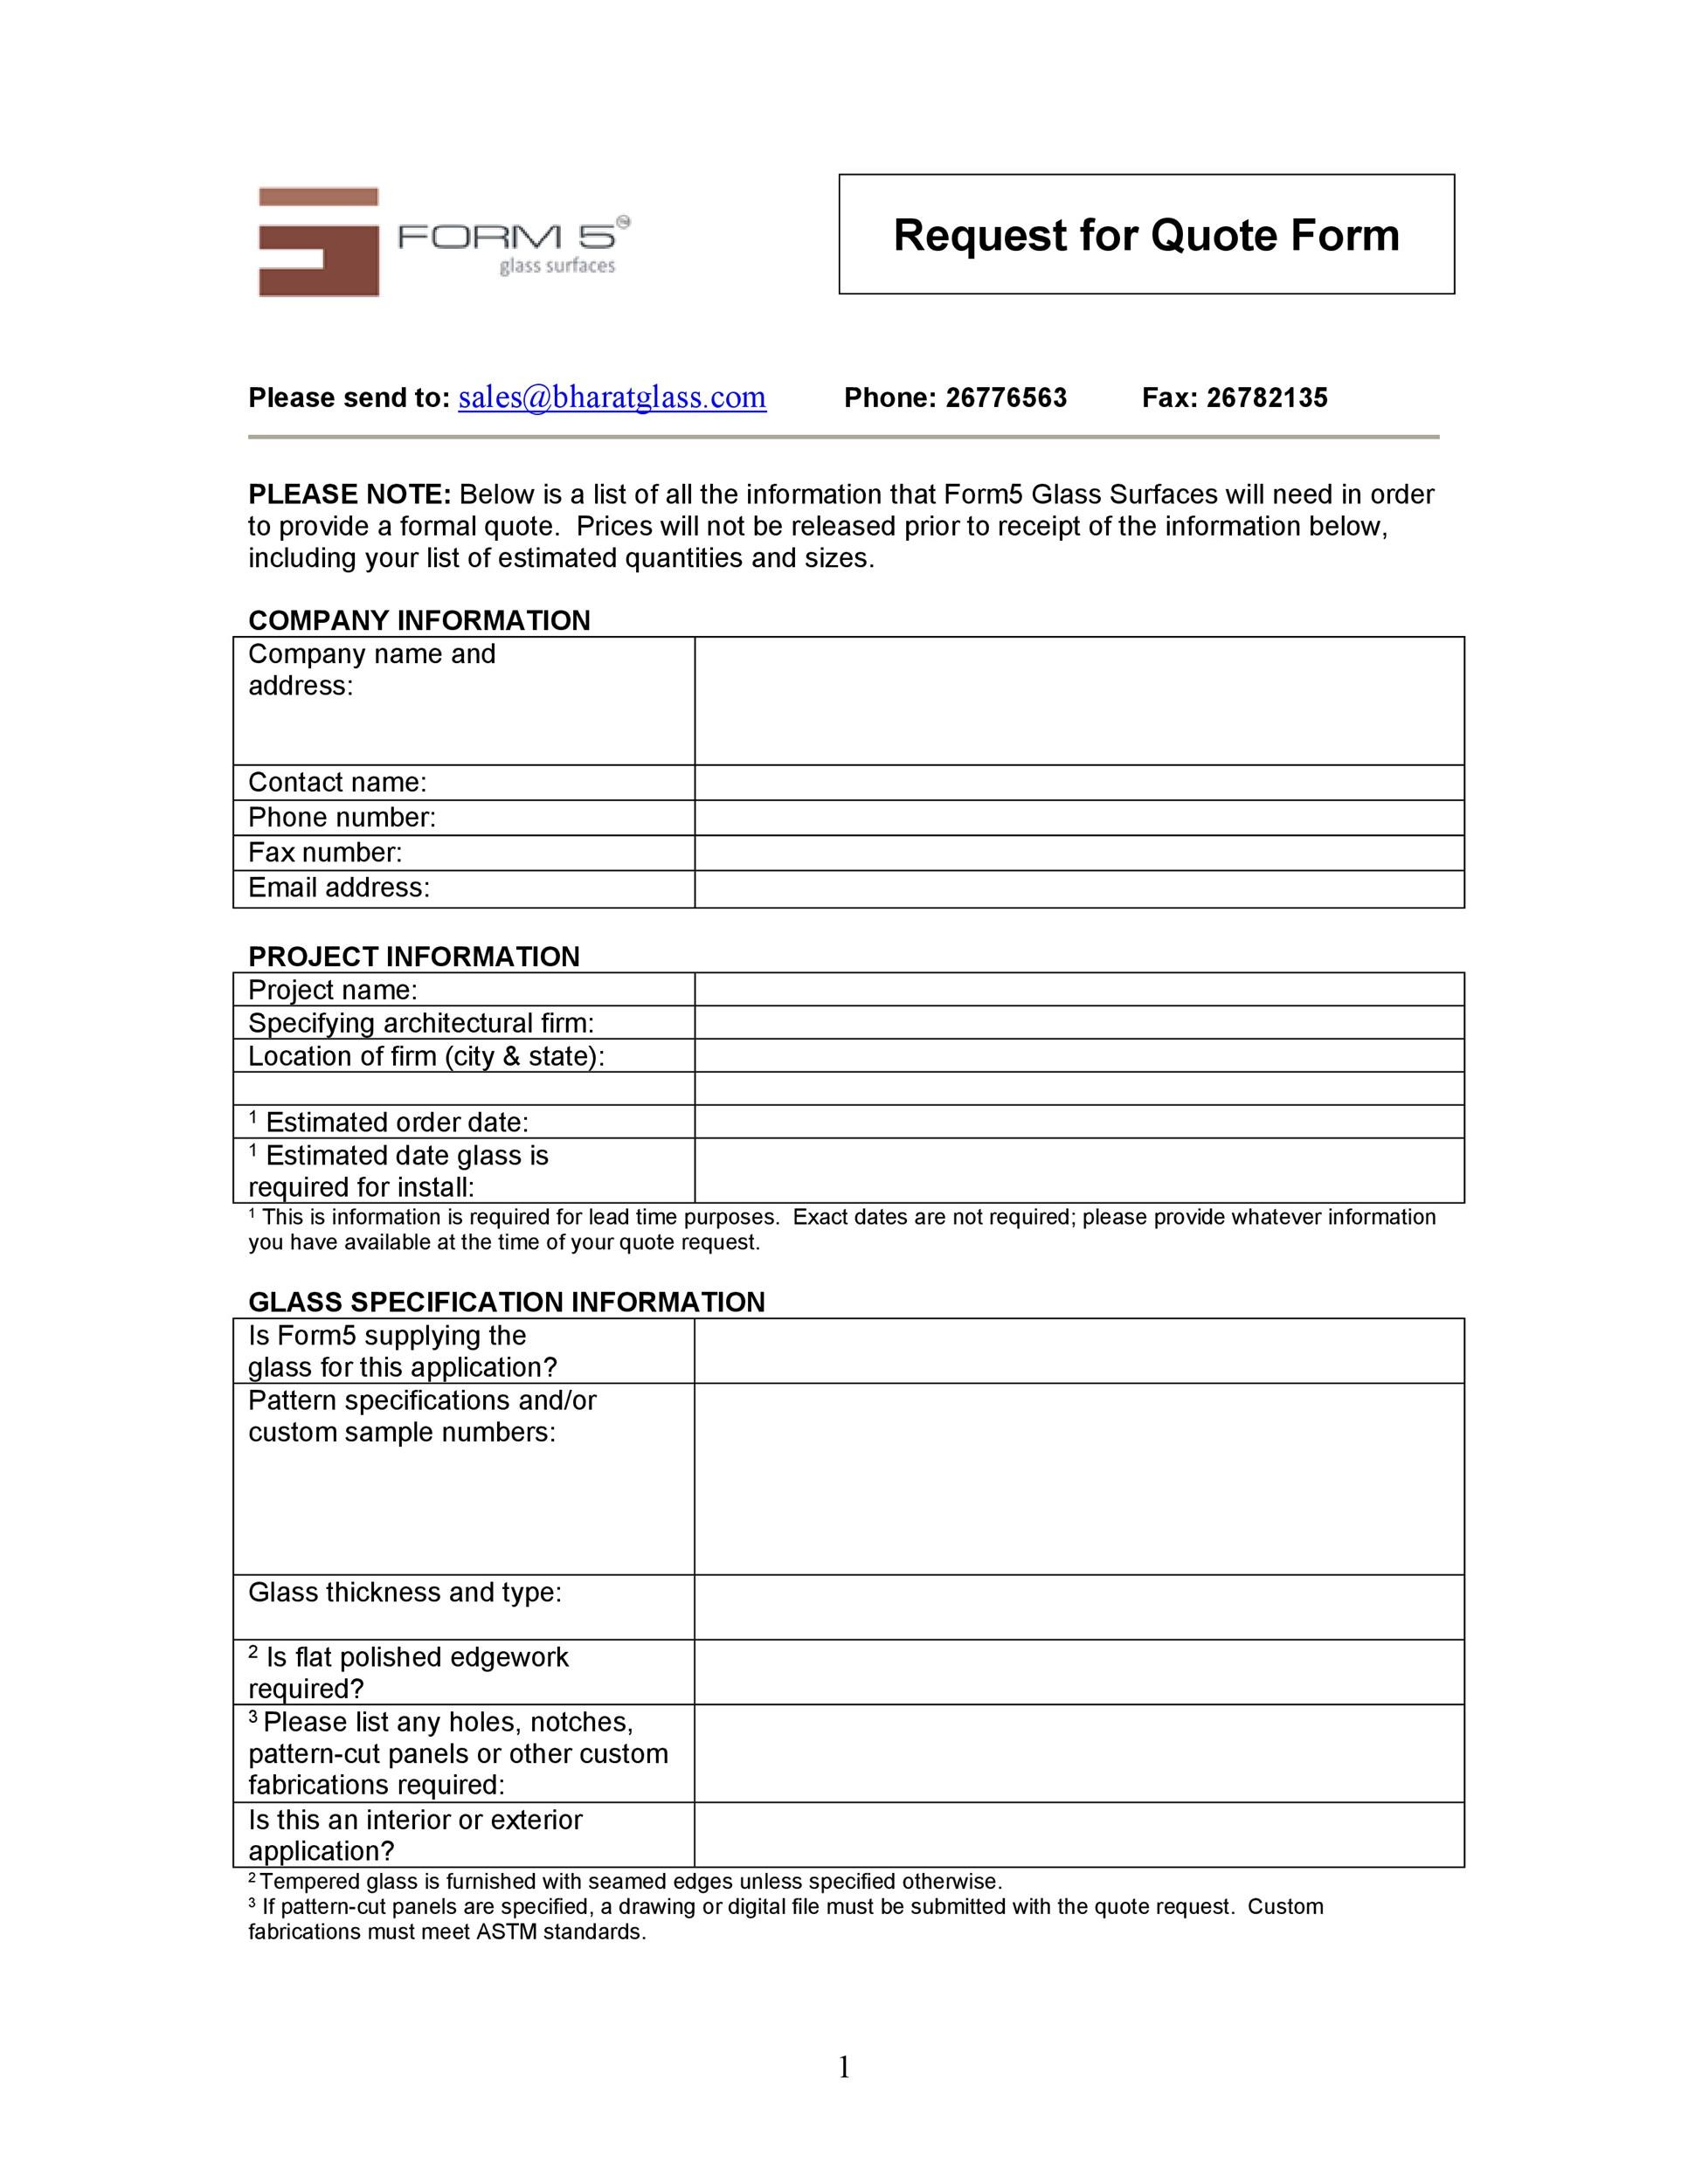 Quote Request Form Template Excel from templatelab.com